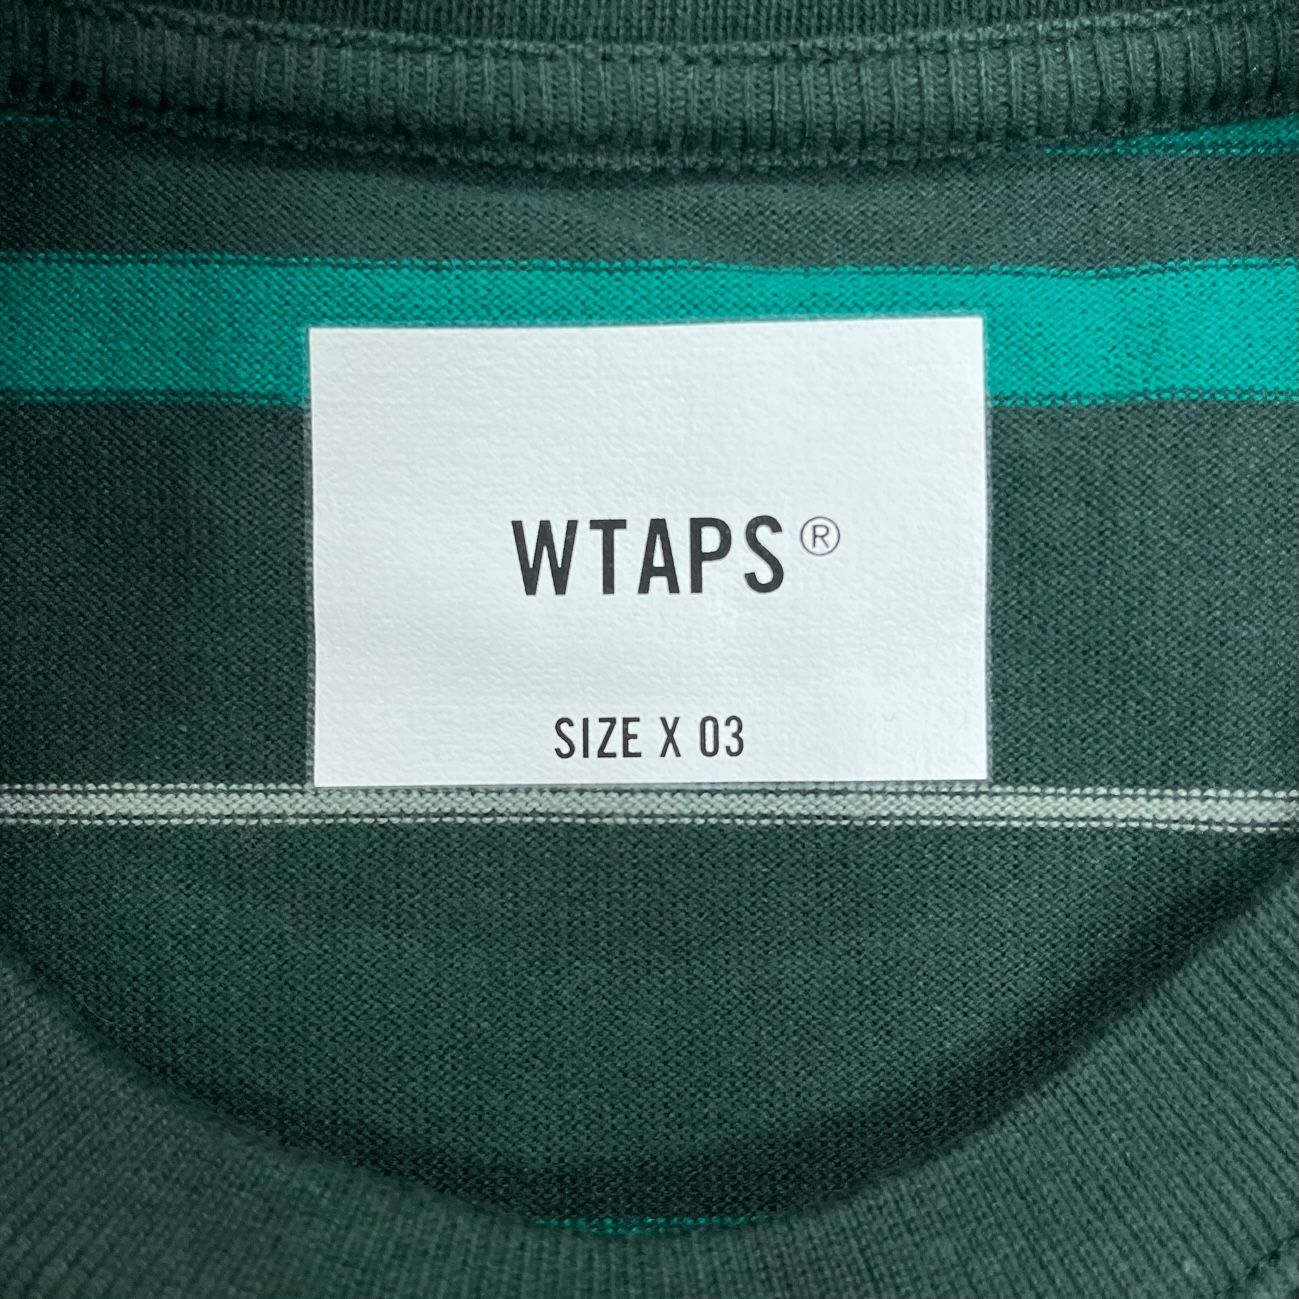 WTAPS ダブルタップス 23SS 231ATDT-CSM30 BDY 02 SS COTTON TEXTILE SIGN ボーダー Tシャツ 半袖 カーキ系 03